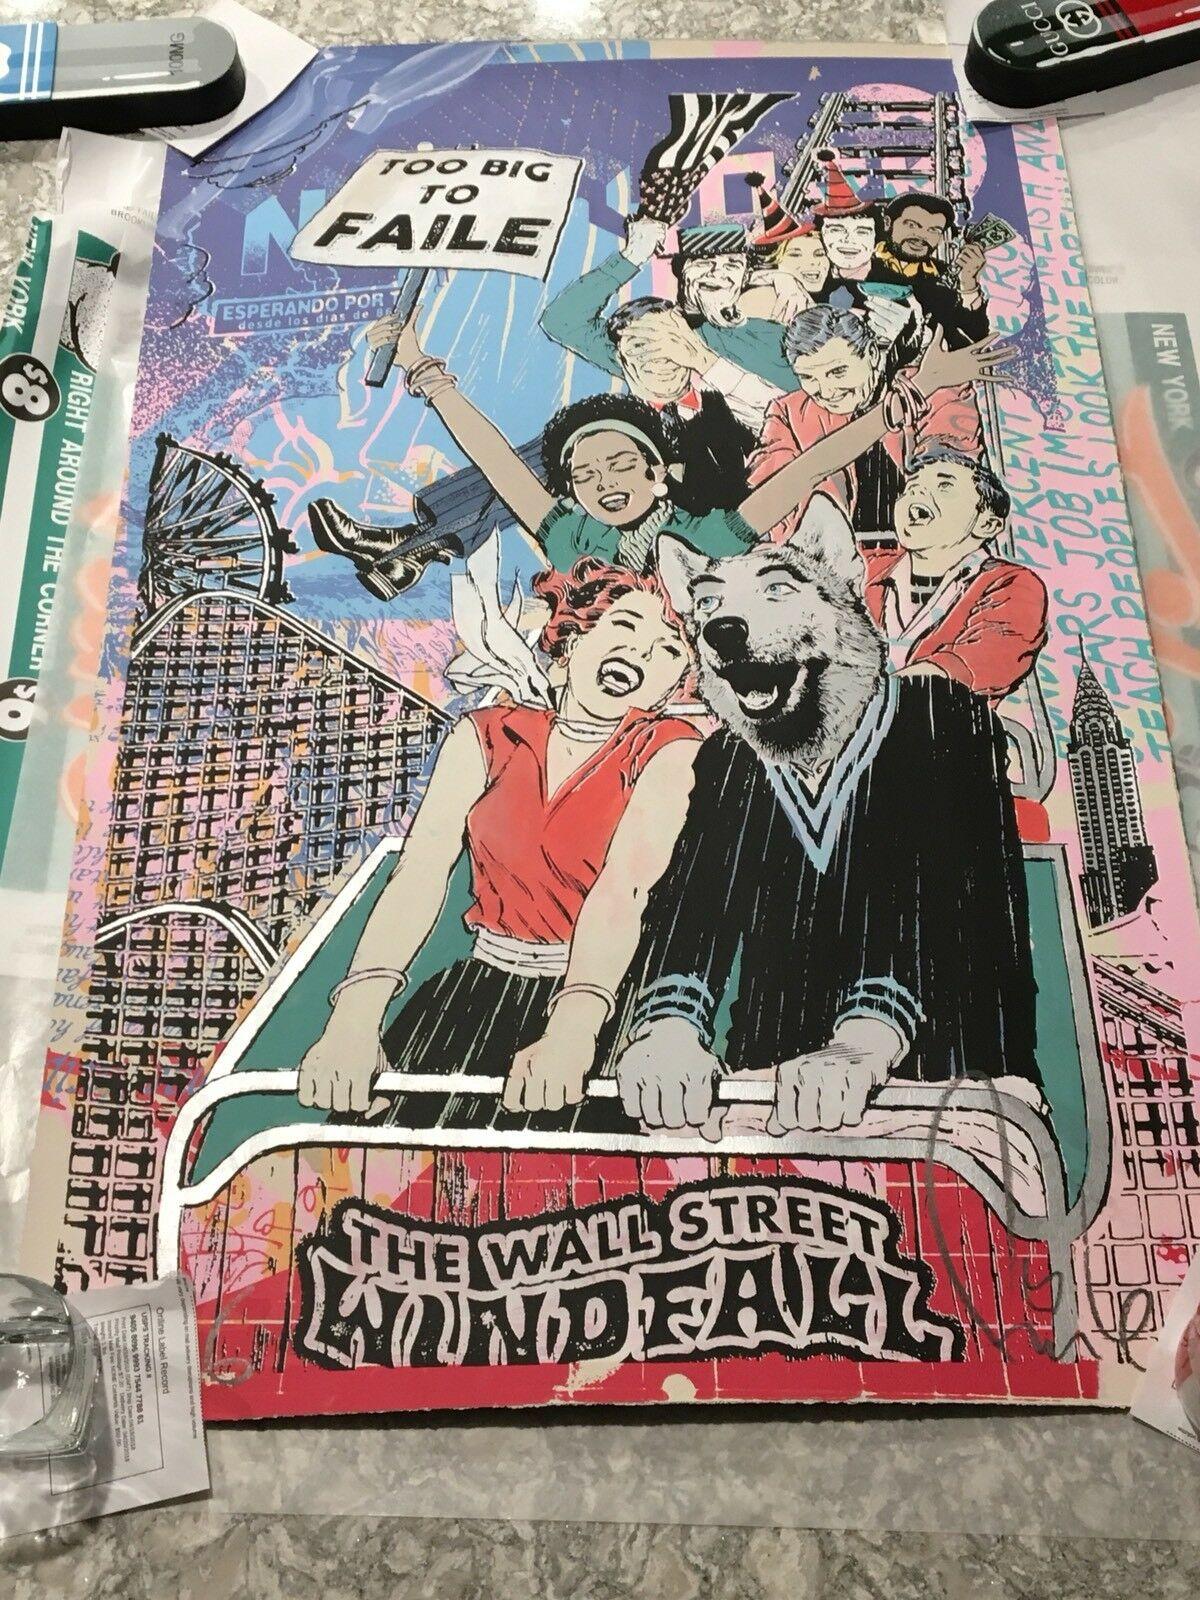 WALL STREET WINDFALL / 86 B-SIDE  ~SOLD OUT MINT CONDITION PRINT" - Print by Faile